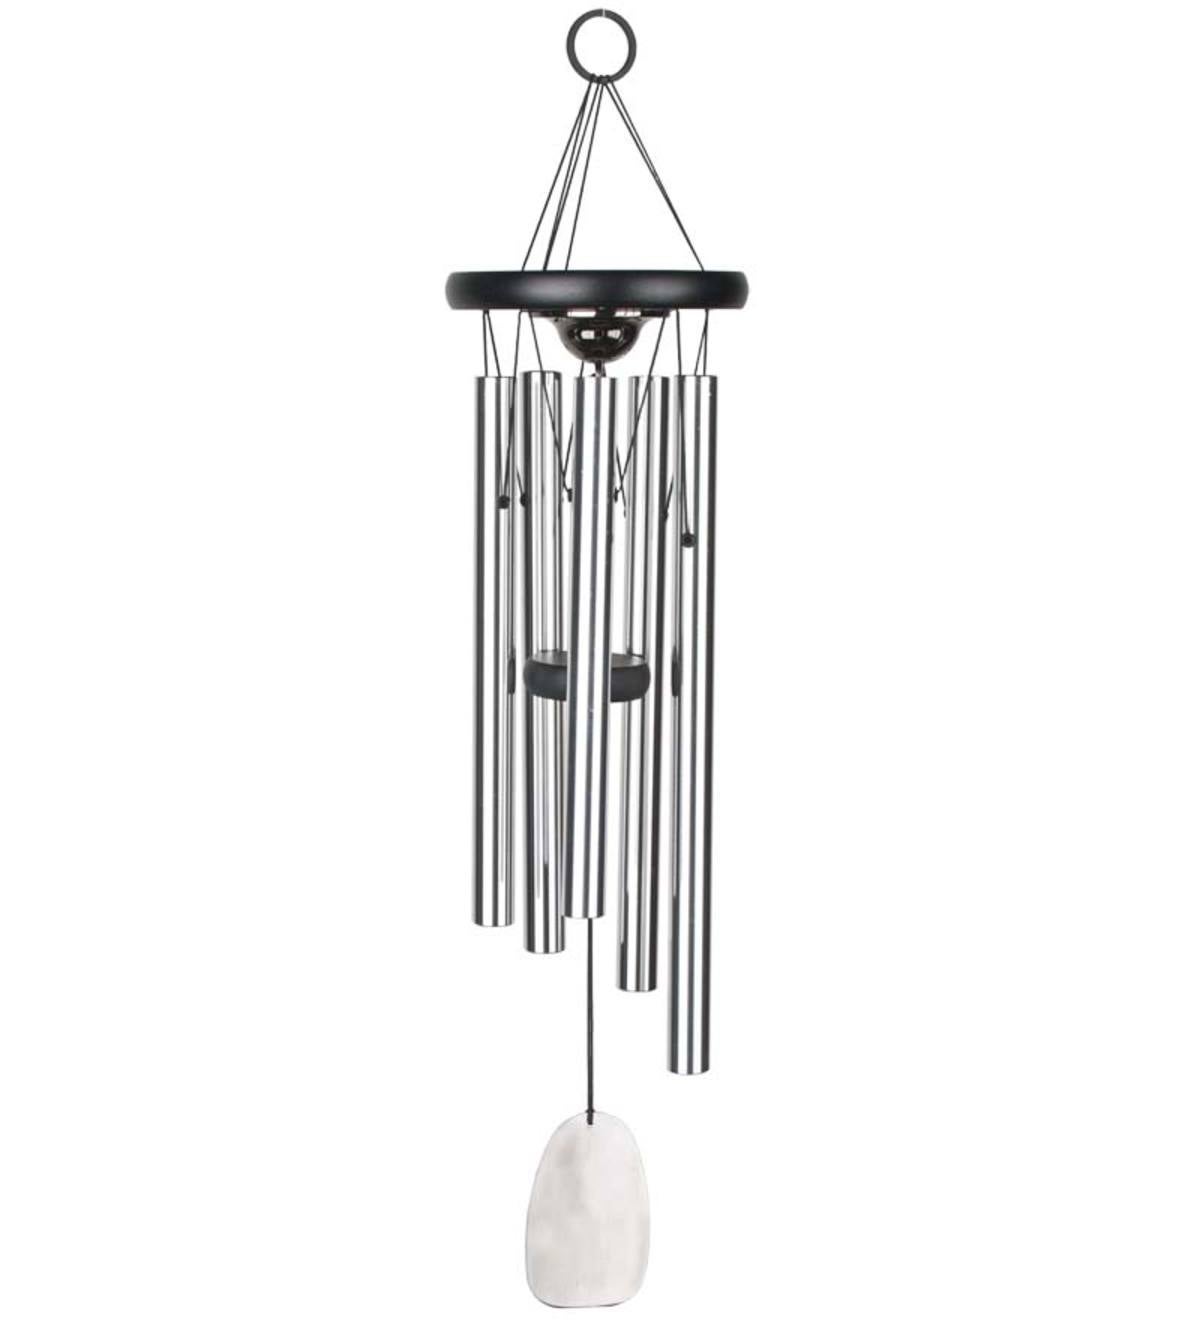 Memorial Wind Chime With Weatherproof Metal Compartment In Silver And Black Finish